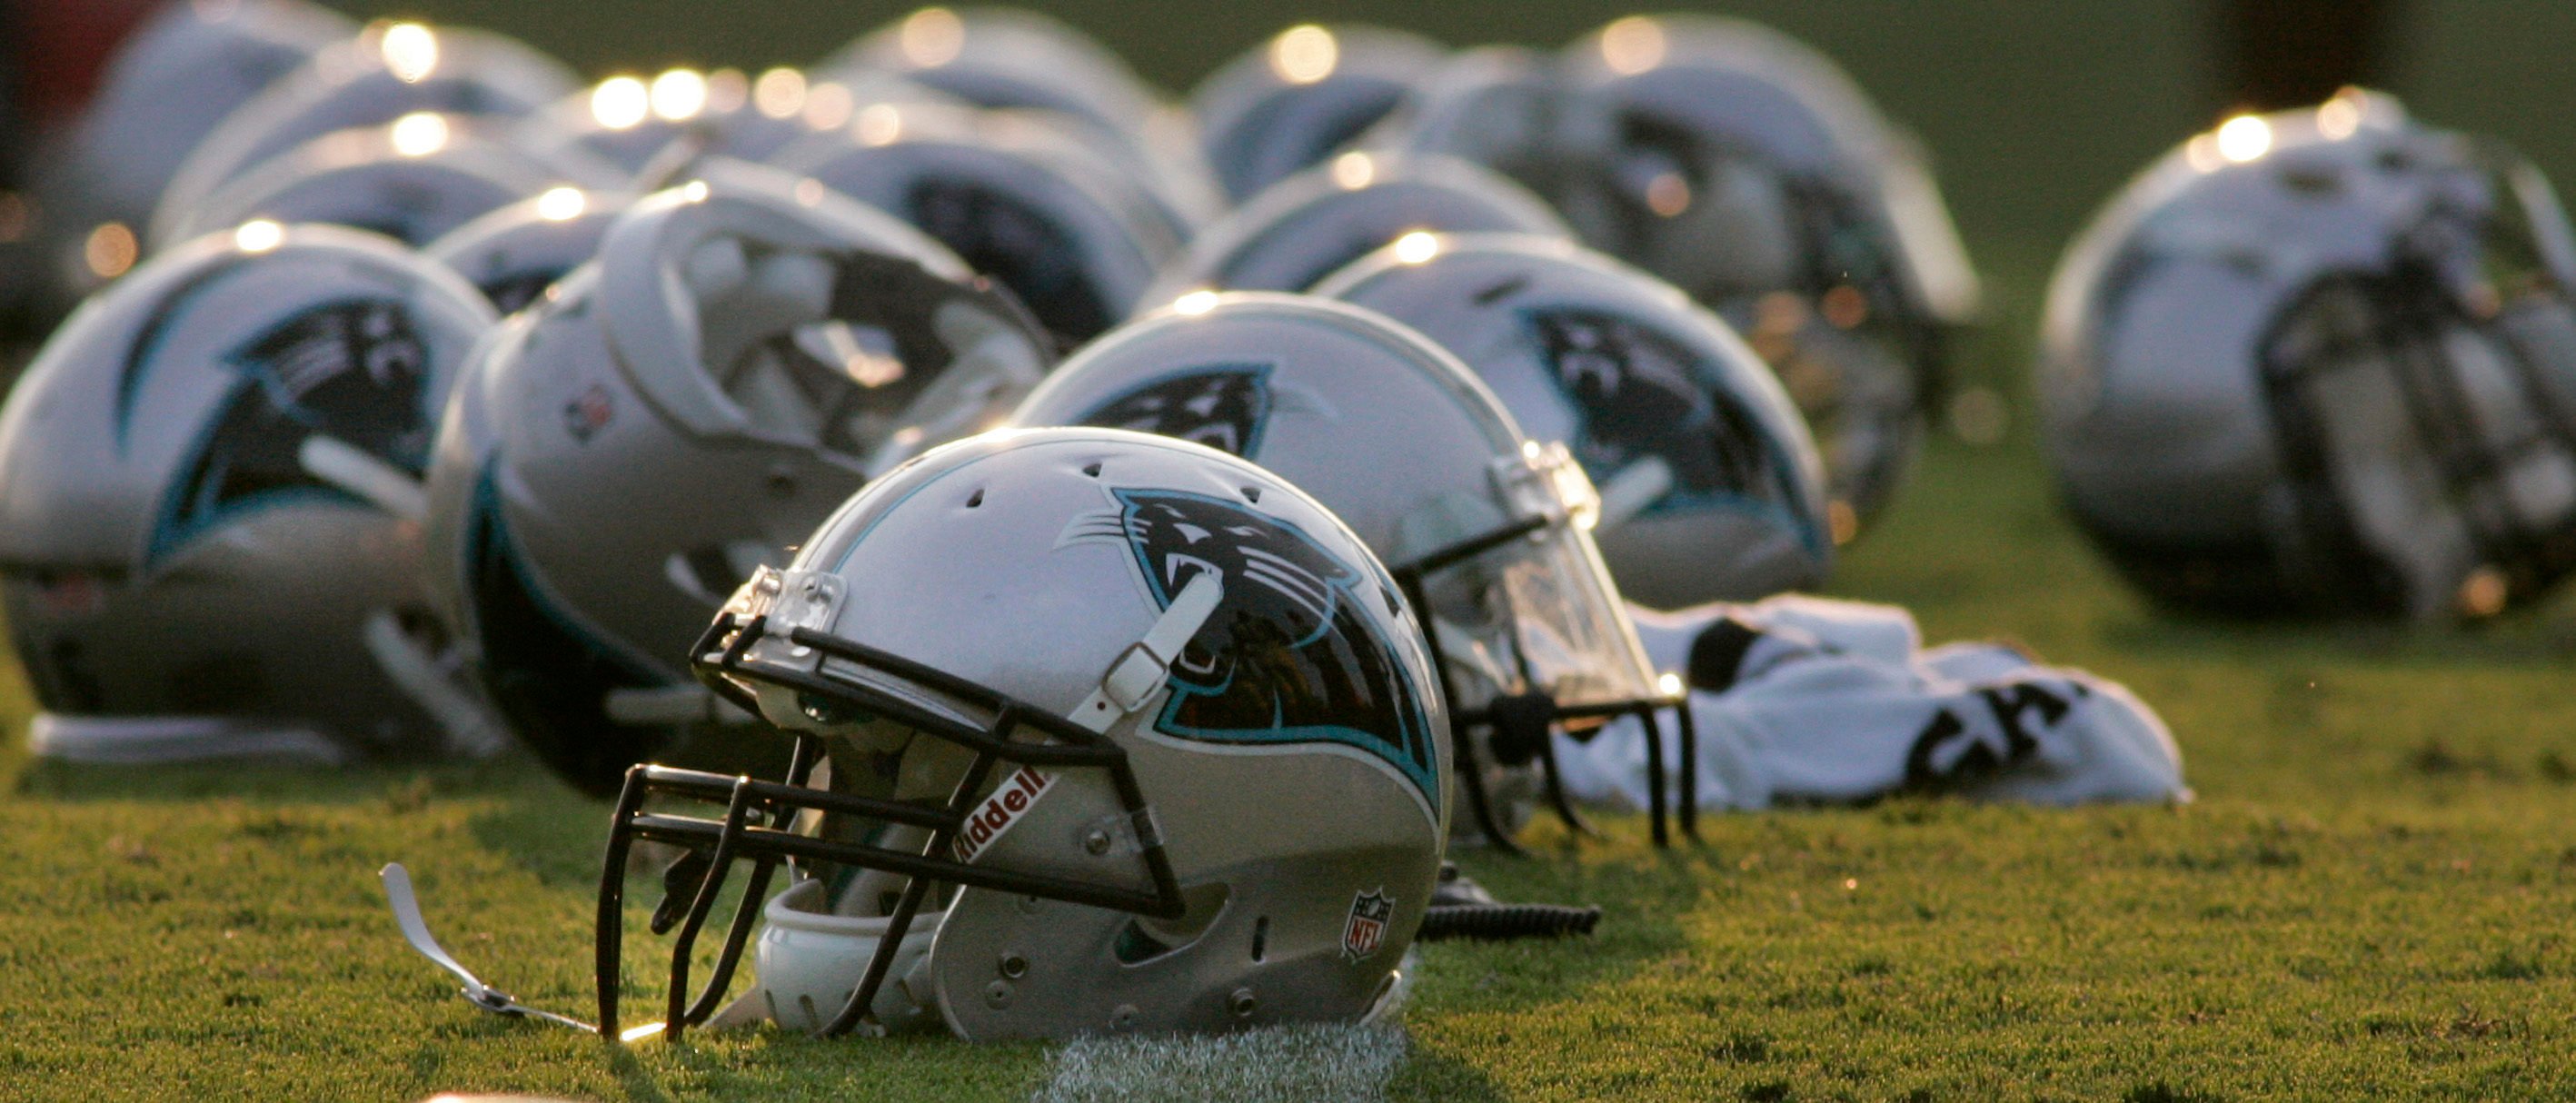 Carolina Panthers helmets are pictured on the field as players work out on their first day in pads at the NFL training camp at Wofford College in Spartanburg, South Carolina August 1, 2011.  REUTERS/Mary Ann Chastain